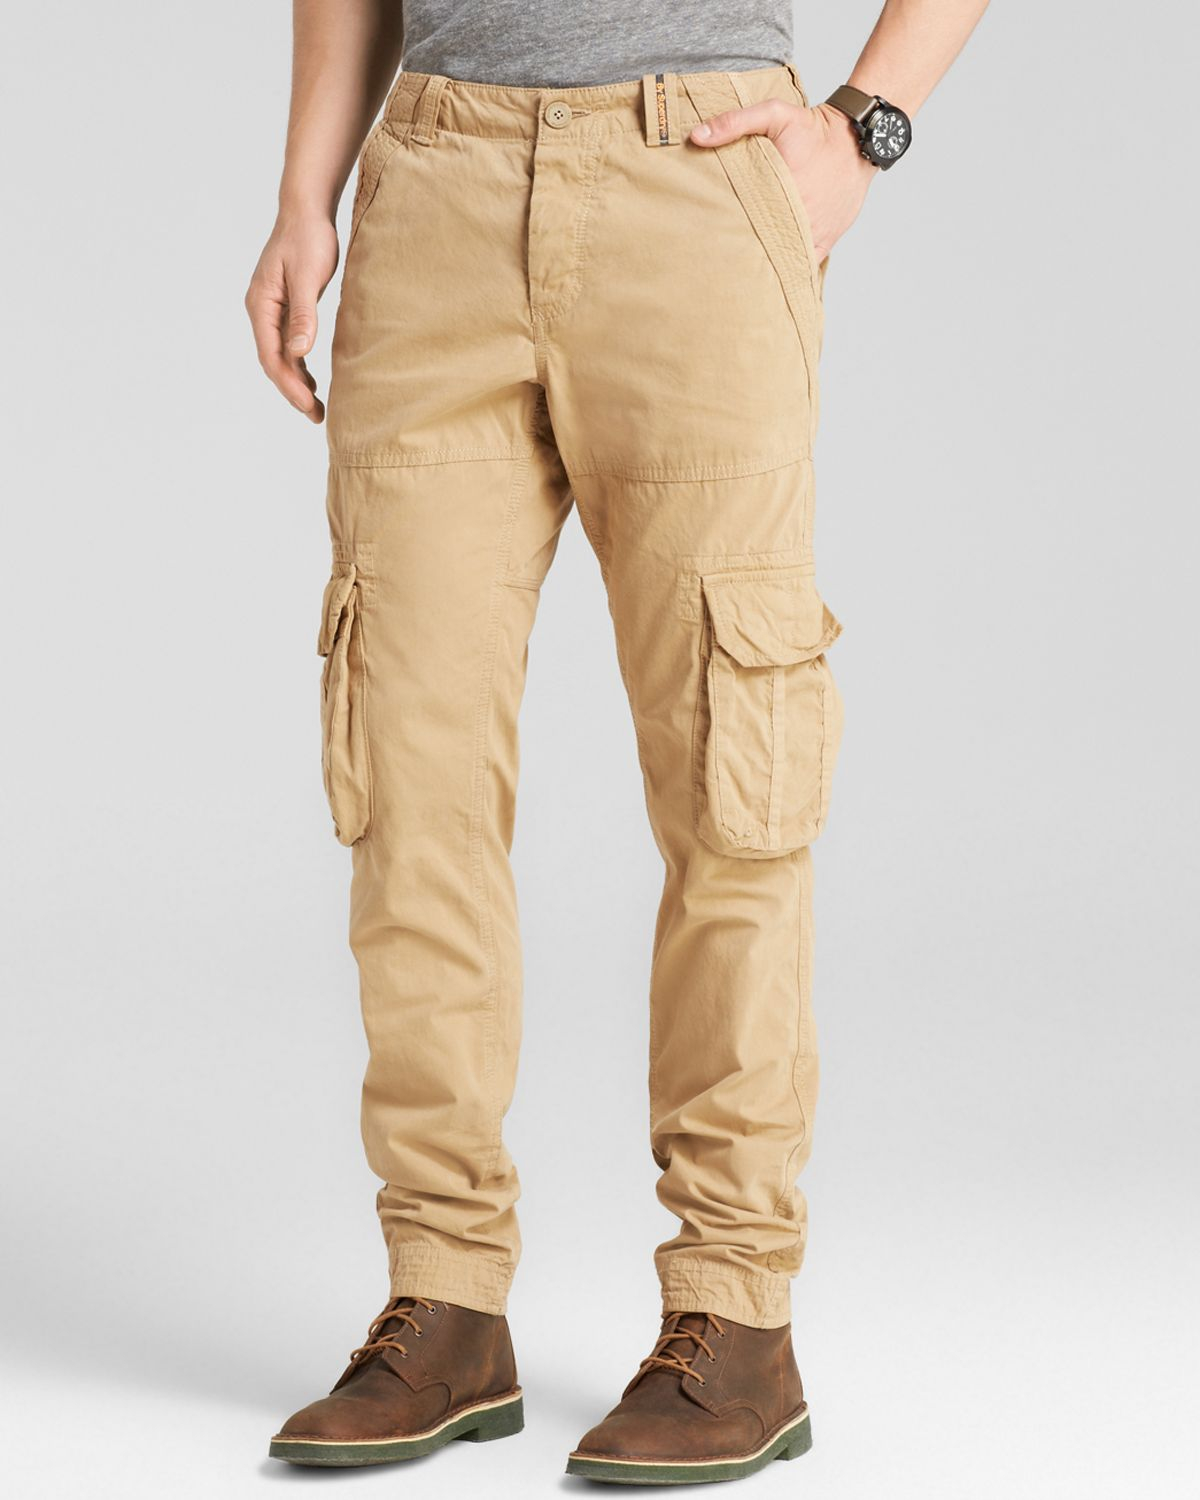 Superdry Slim Core Cargo Lite Pants in Sand (Natural) for Men - Lyst